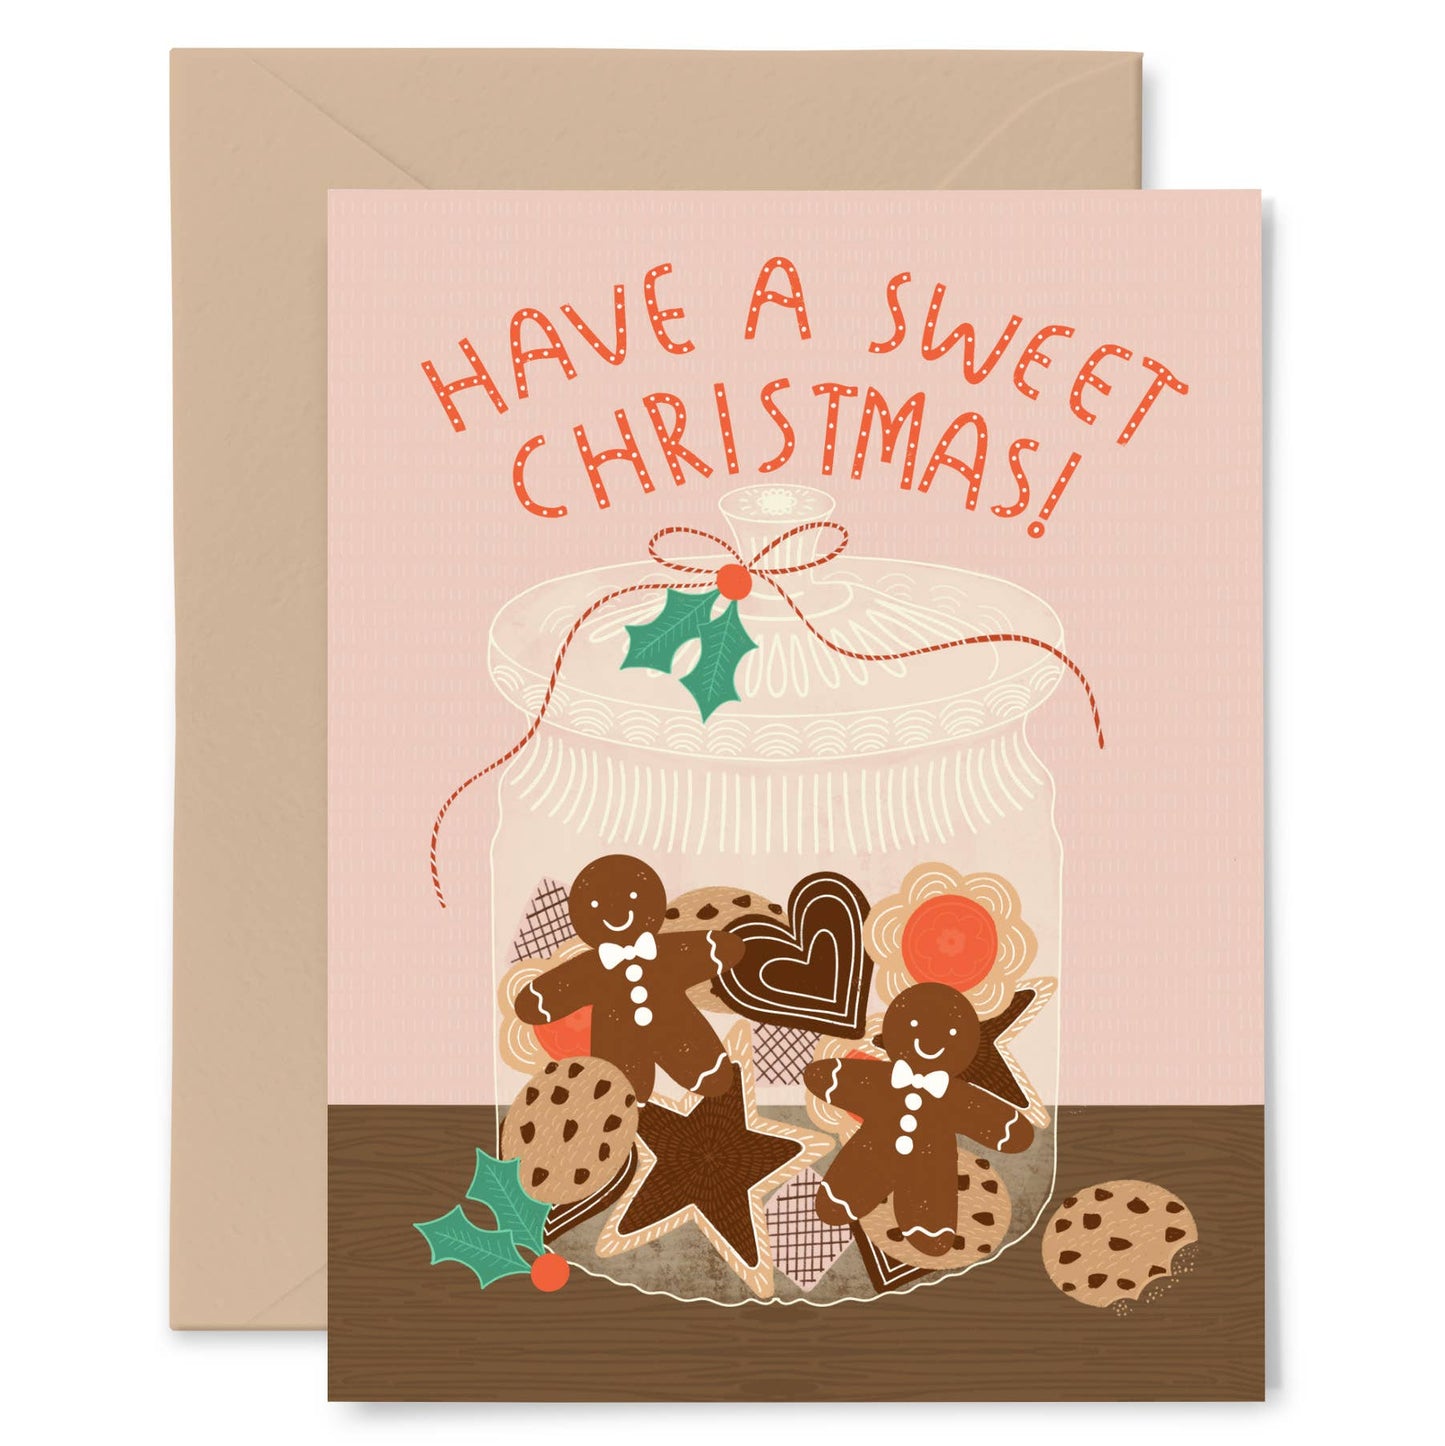 Greeting card that reads "Have a sweet Christmas!" over a jar of Christmas cookies 